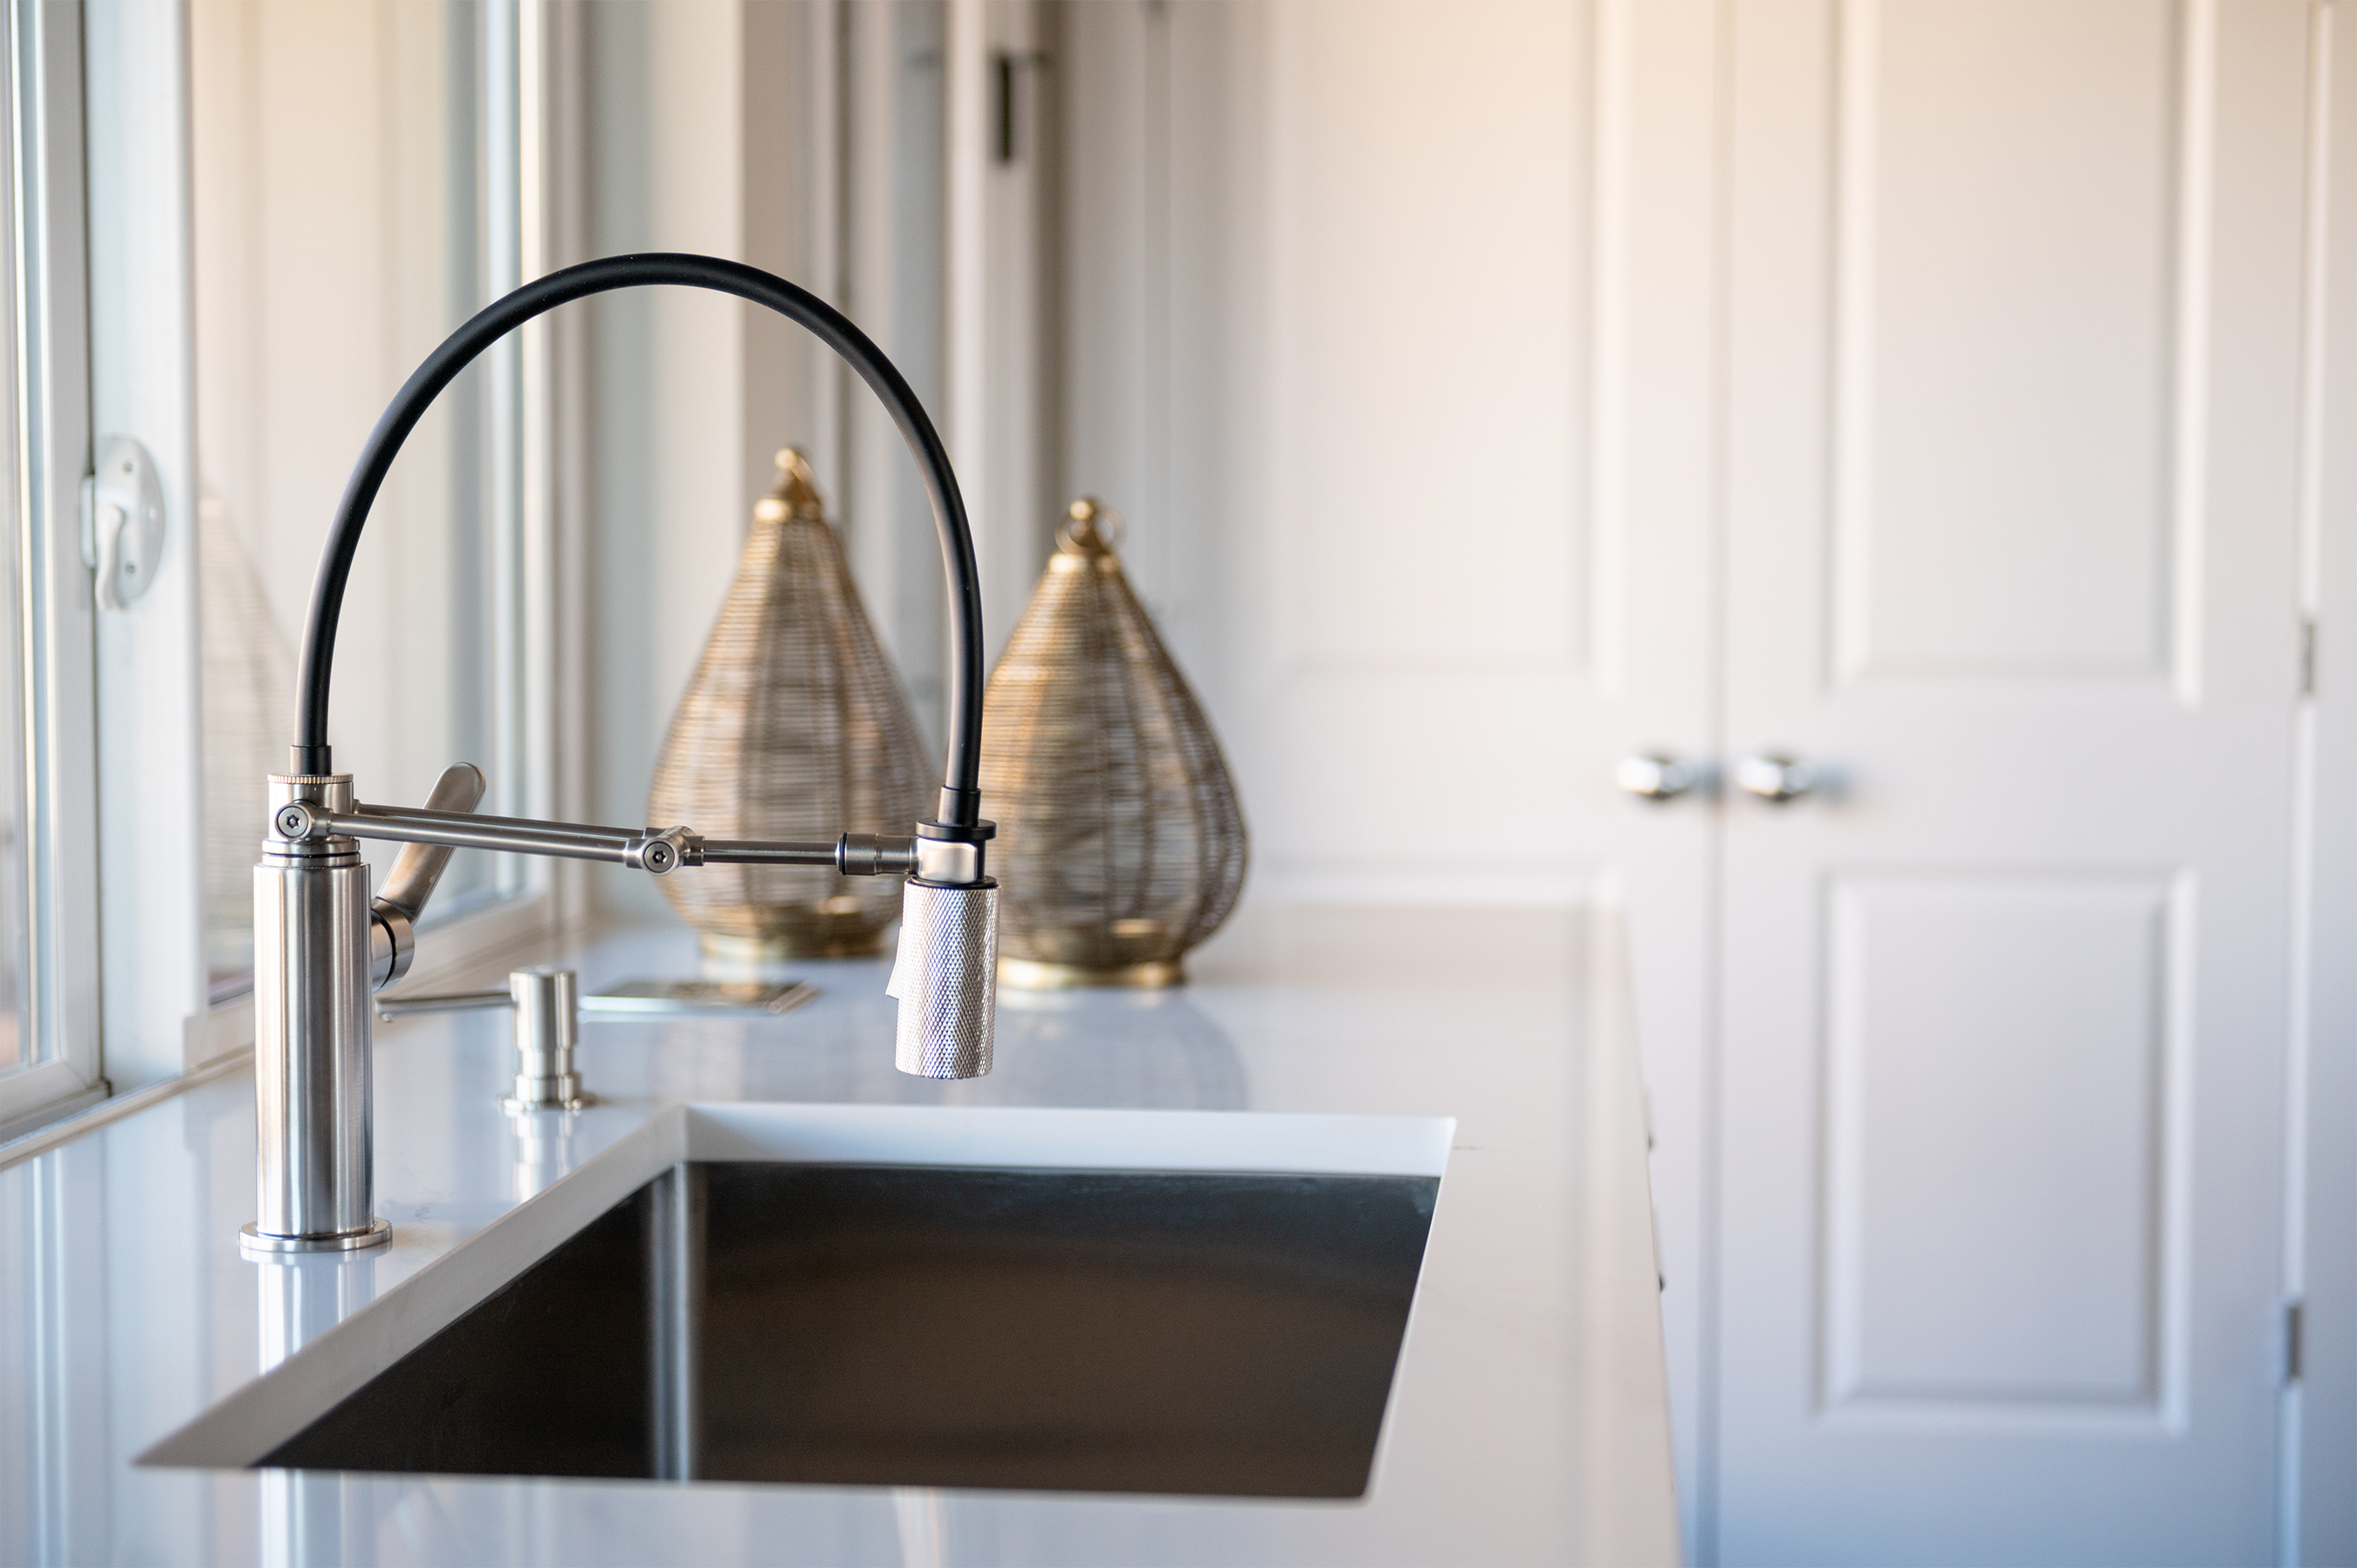 Hands-free touch faucet in the kitchen, Tri Pointe Homes